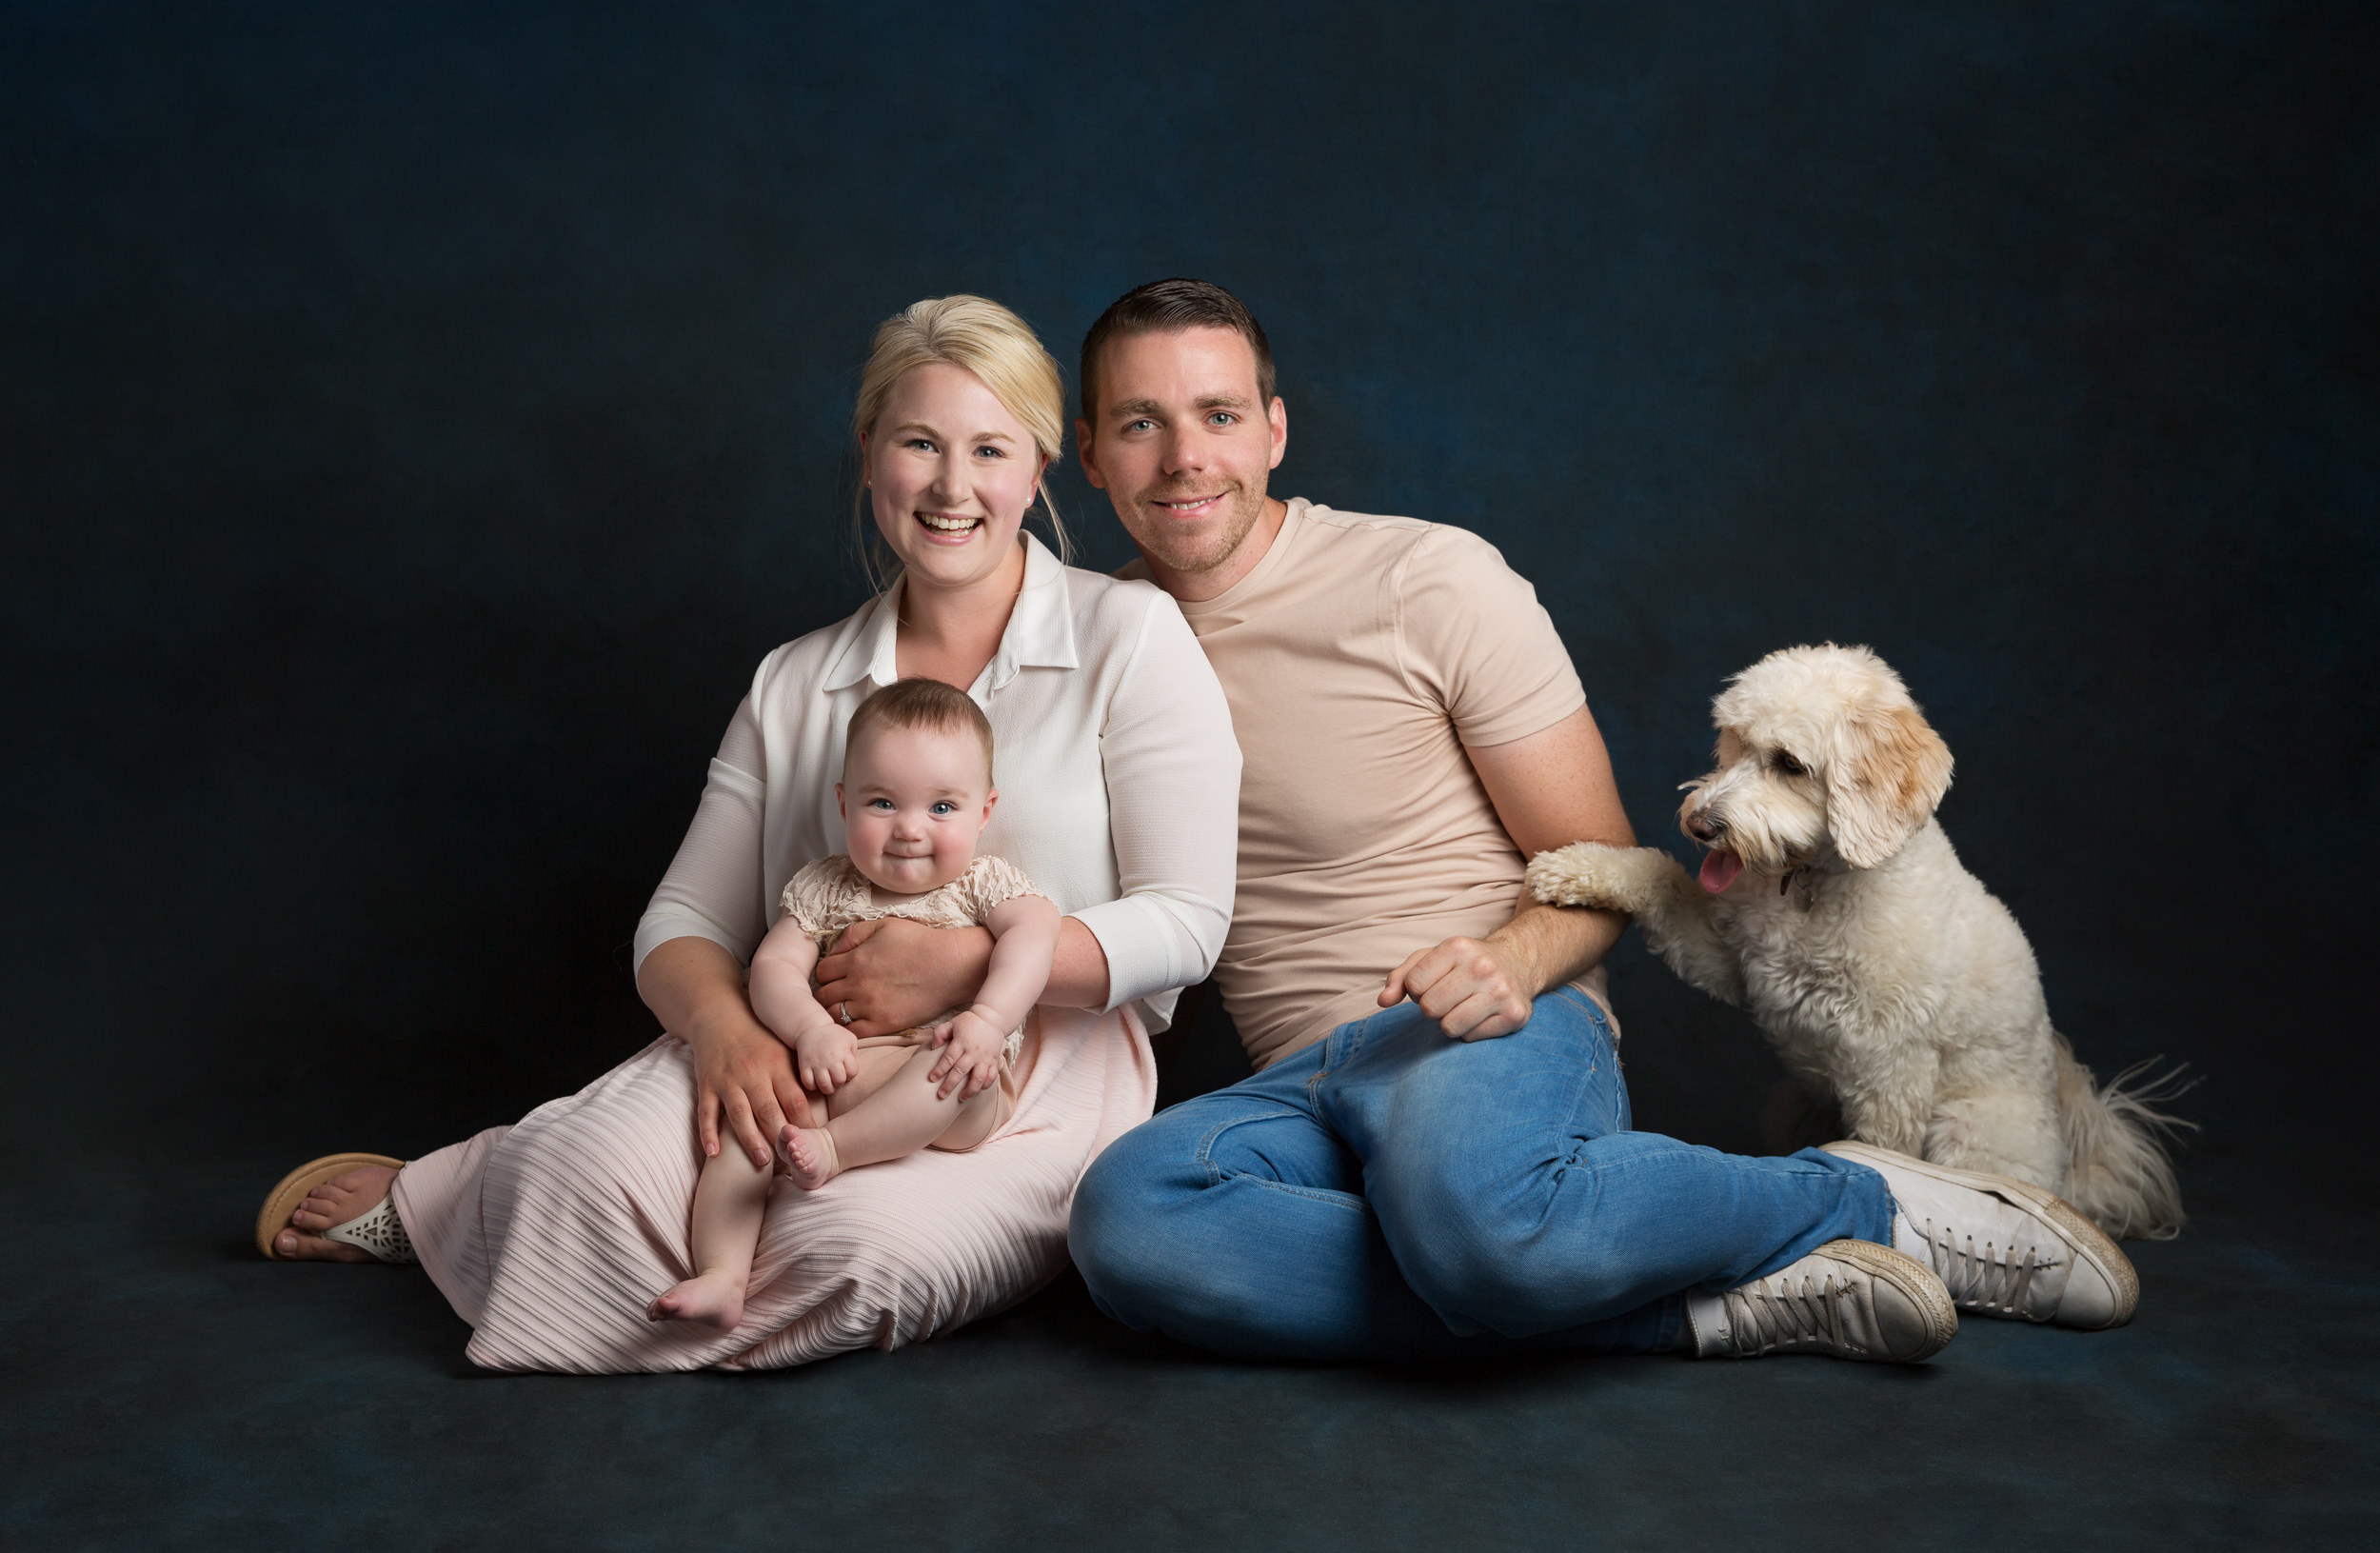 Family portrait including the dog! Taken in Sandbach, Cheshire